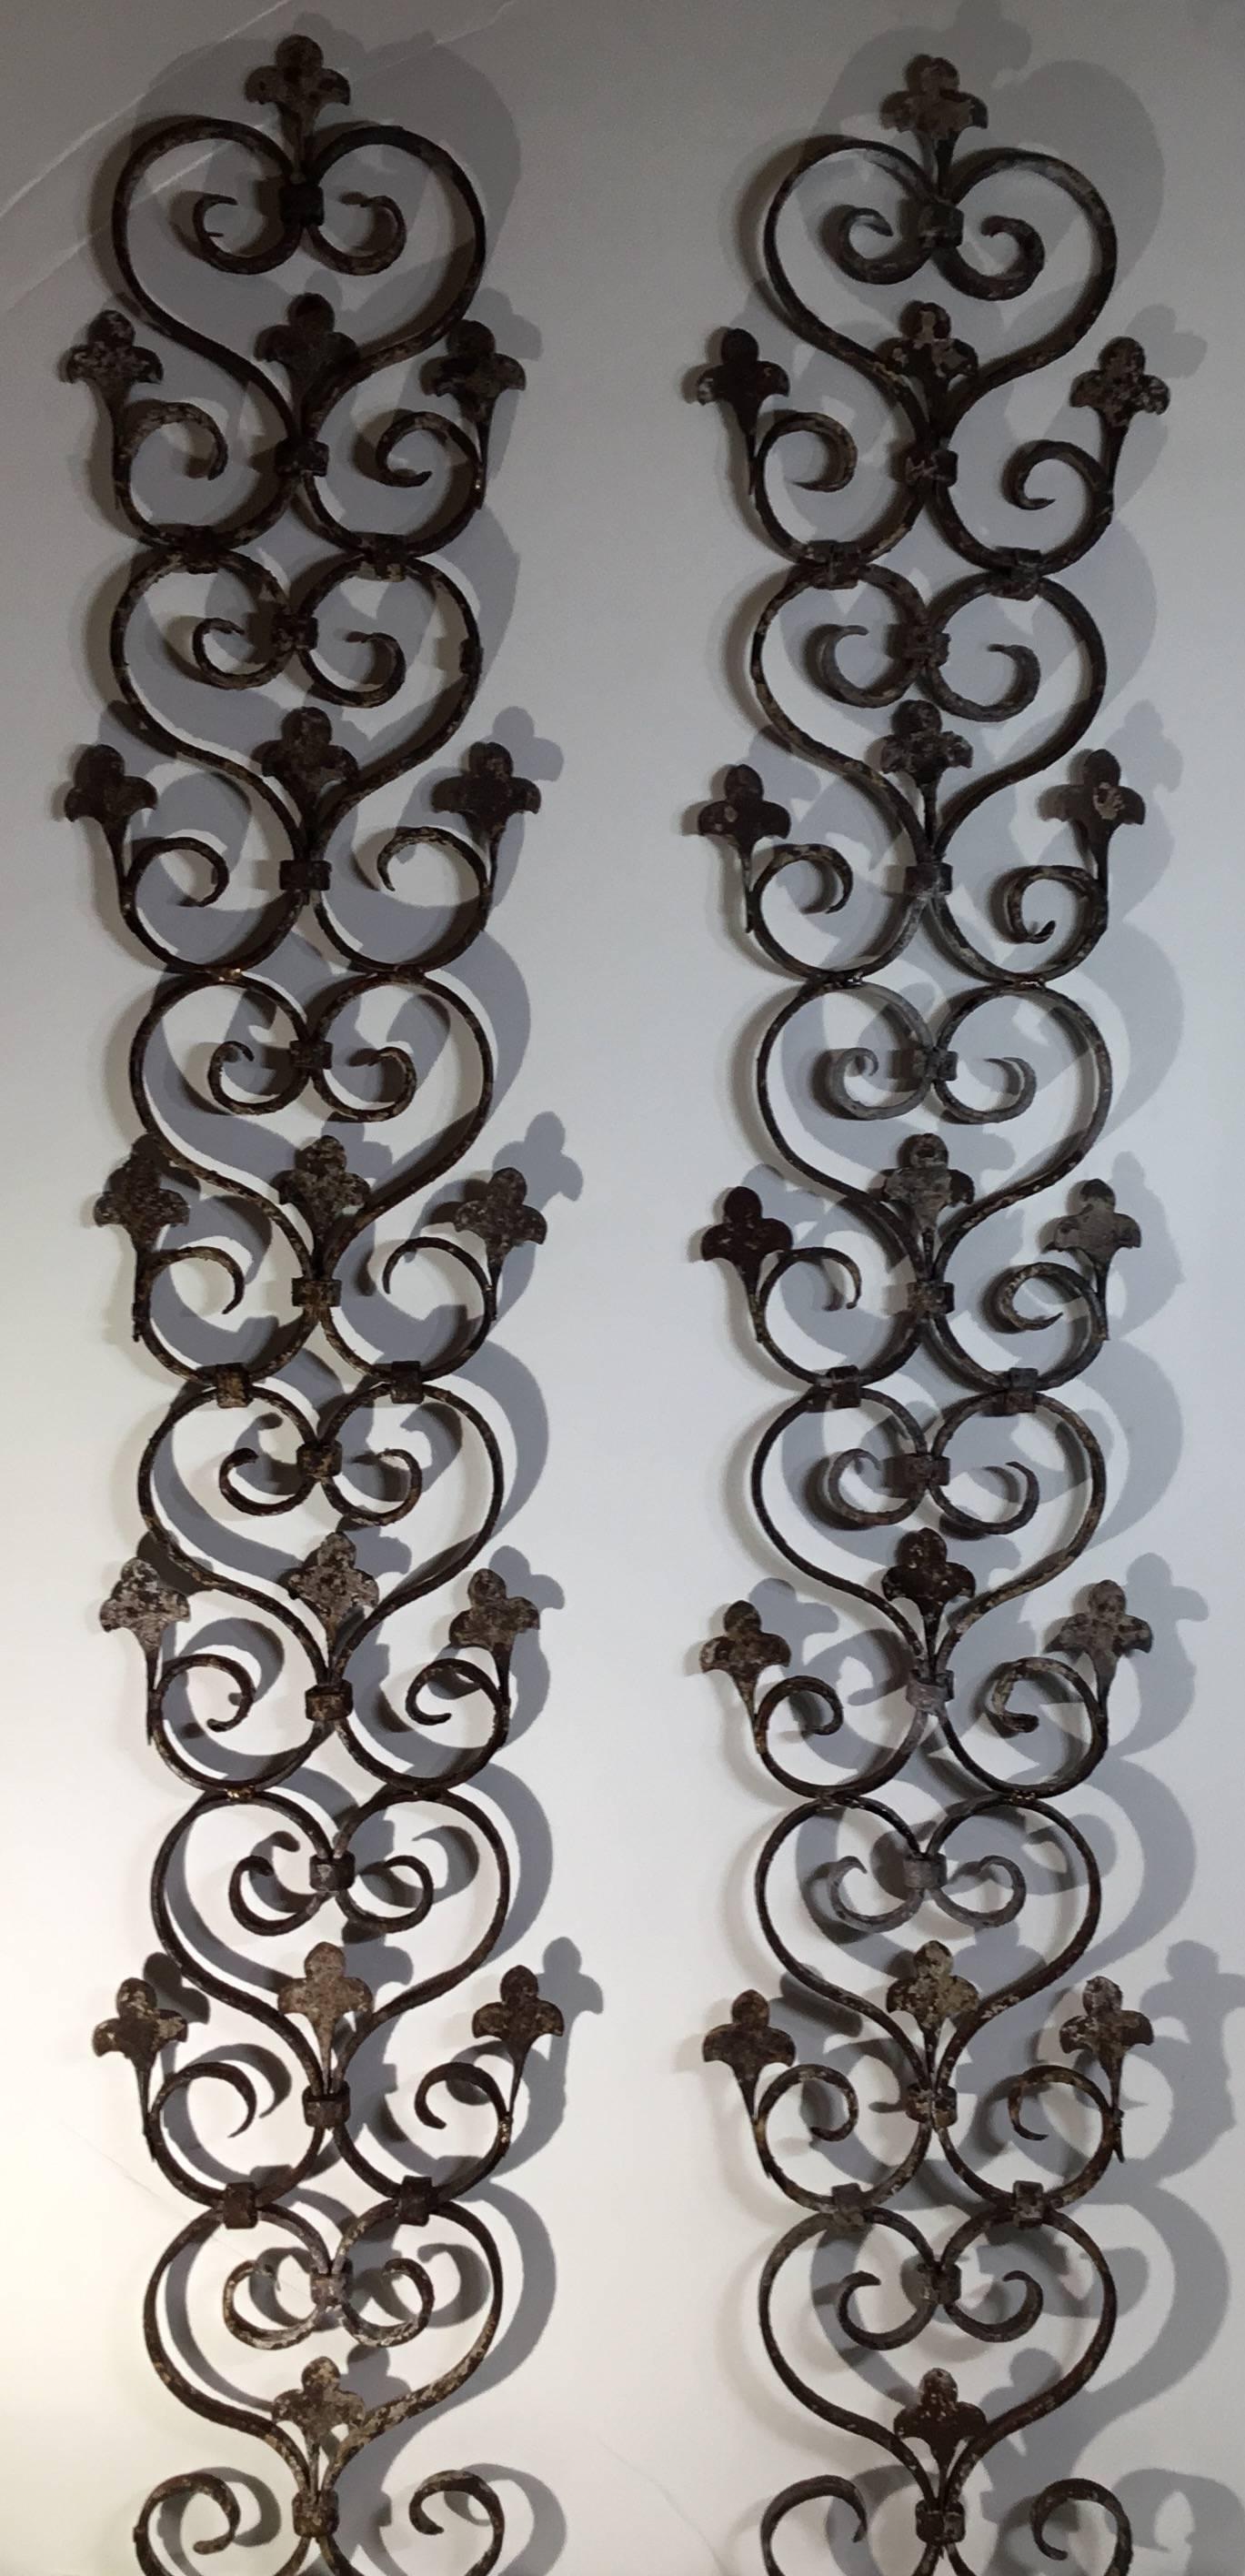 Elegant pair of wall hanging made of hand-forged and twisted iron pieces from the Mizner Era of
Palm beach Florida., put together to become very attractive wall decoration.
Could use horizontal or vertical.